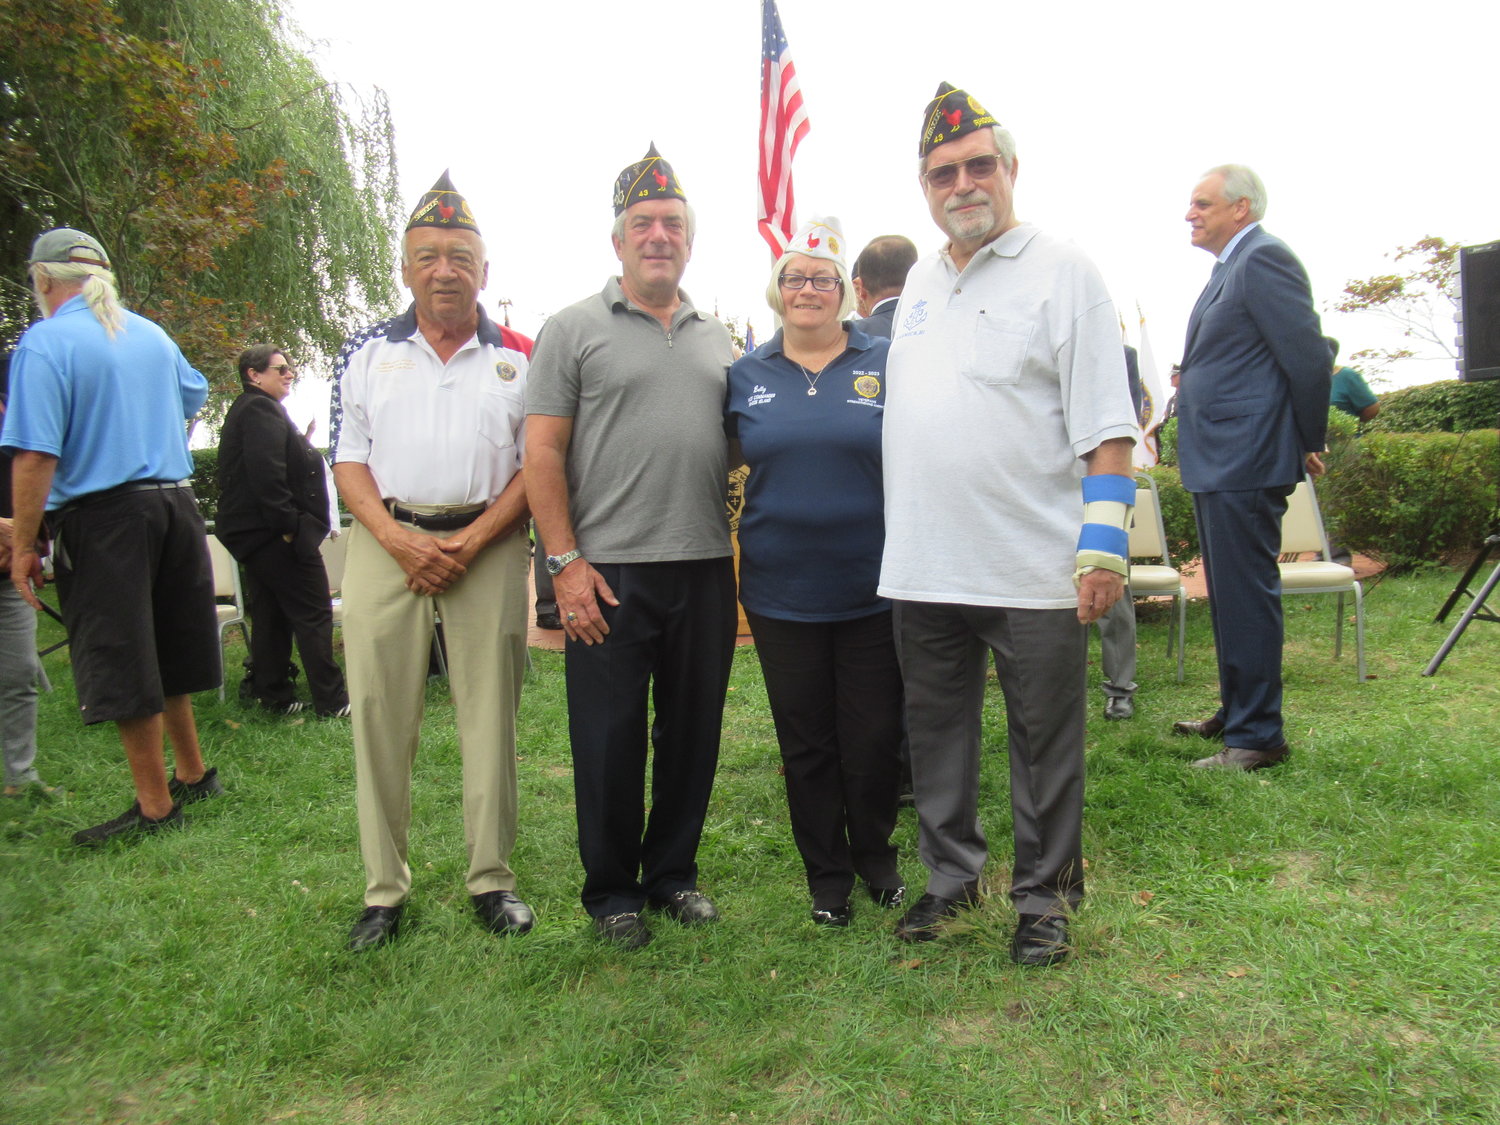 LEGION LINK: Shields Post No. 43 American Legion was represented at Sunday’s 9/11 remembrance by ranking officials Harry Edwards, Jake Holm, John DeGenova and Betty Leach.